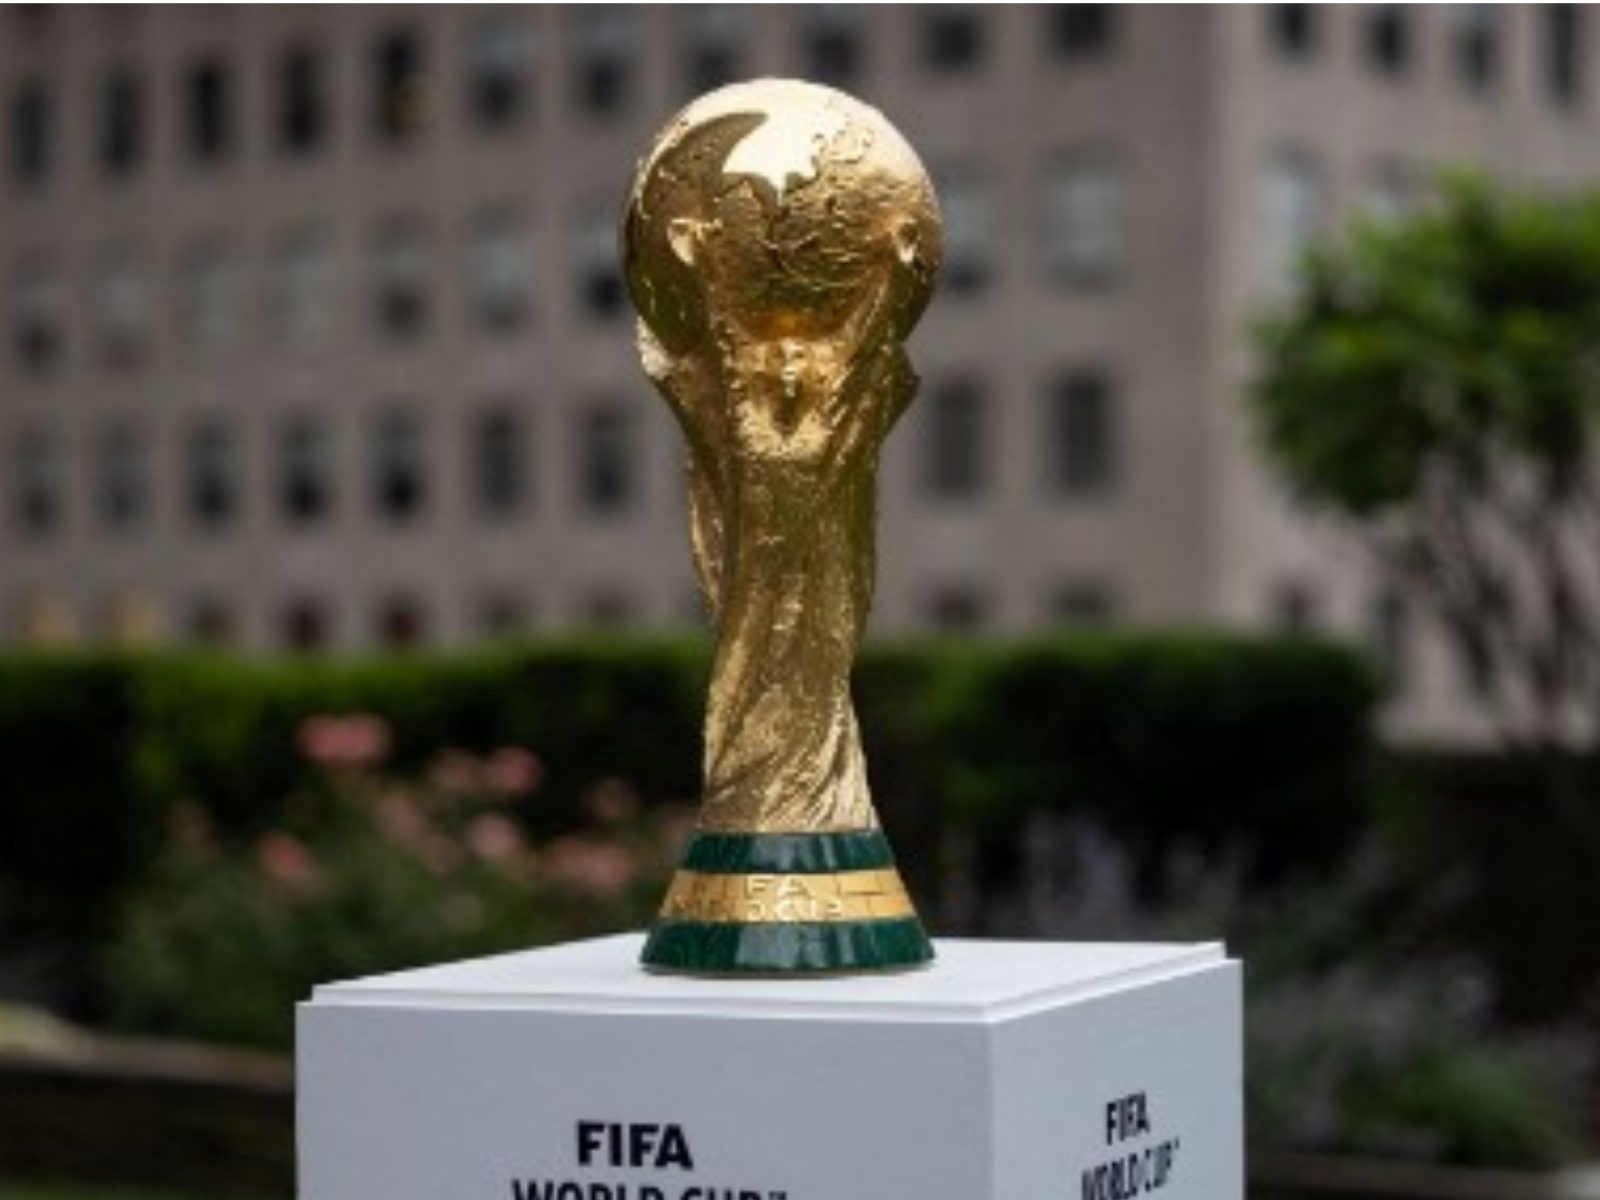 The #FIFAWorldCup Trophy is ready!, trophy